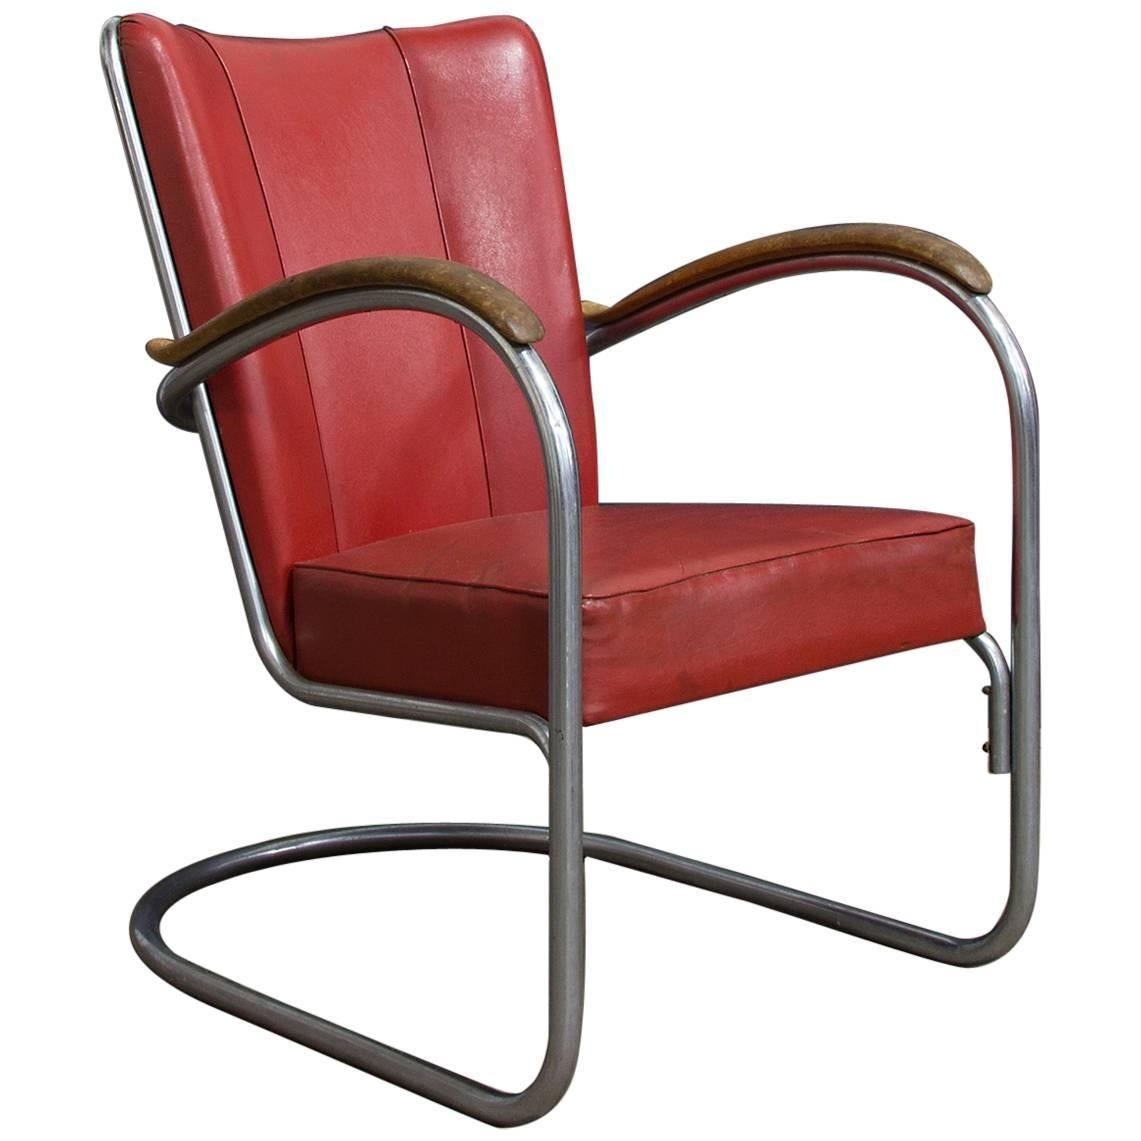 1932, W.H. Gispen for Gispen, a Complete Original 412 Chair with Wooden Armrests